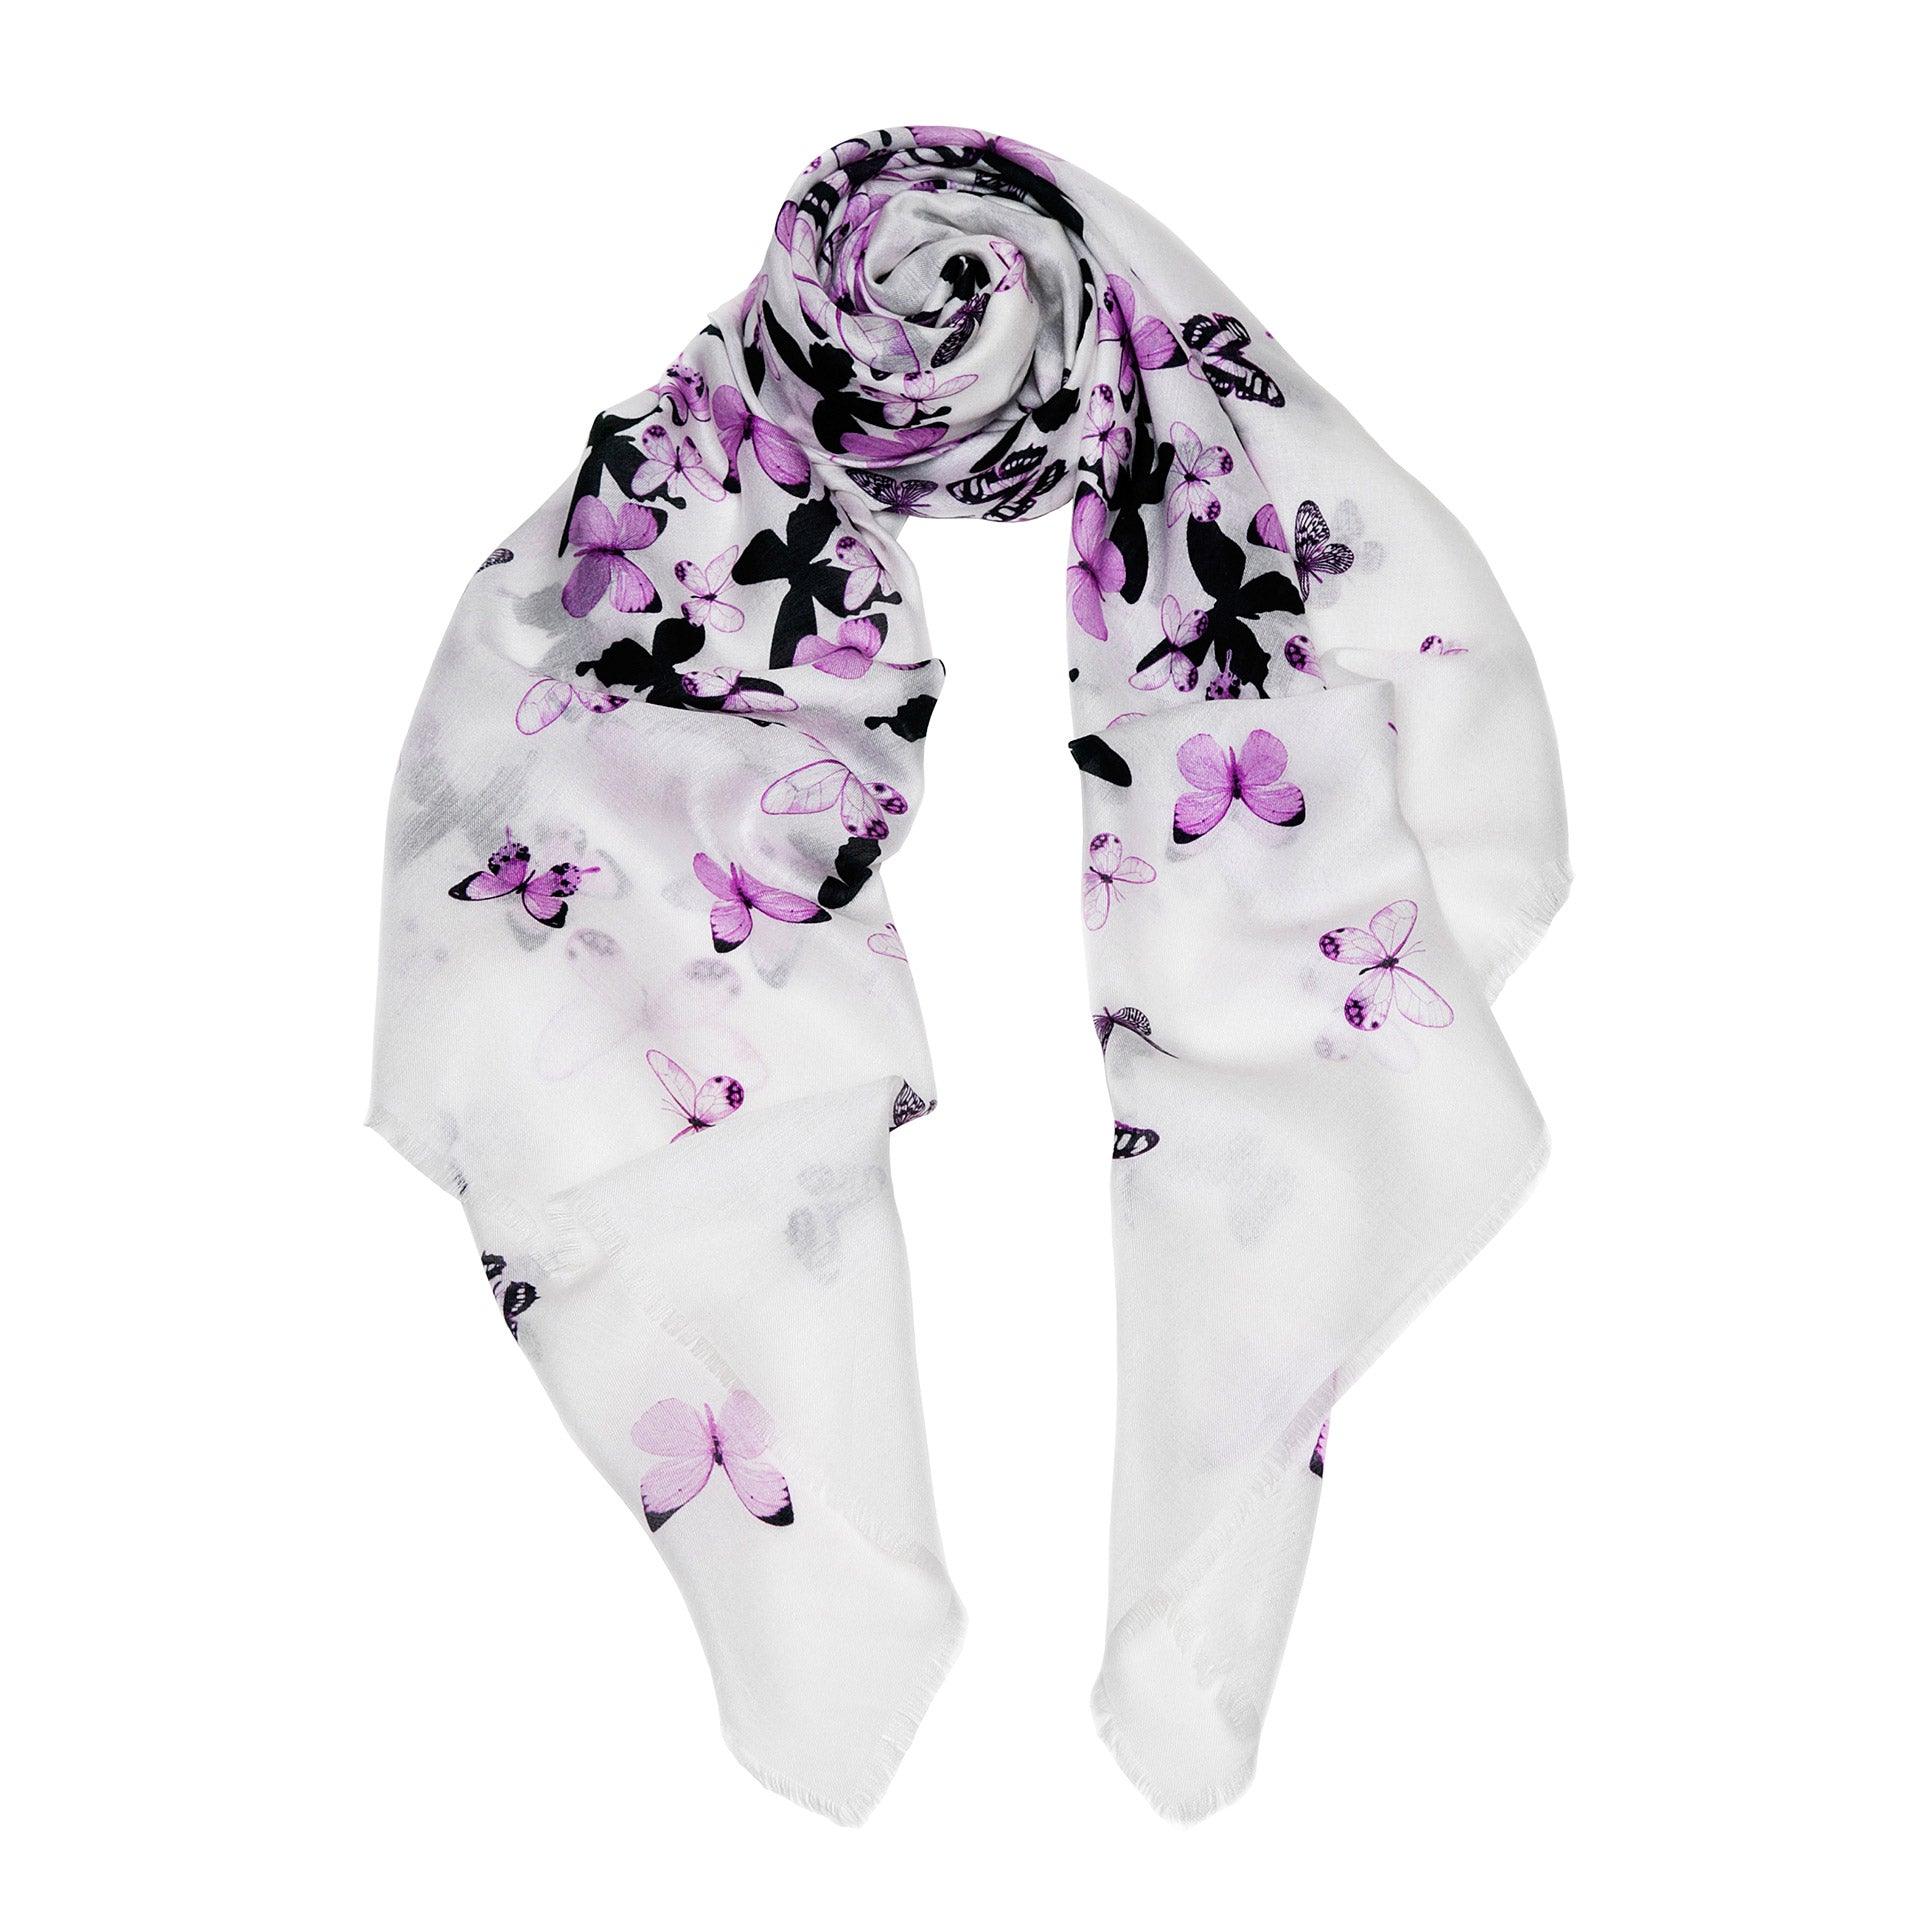 Off White Butterflies Cashmere Blend Scarf - Fusion of London's design and Italian craftsmanship, a luxurious gift choice.